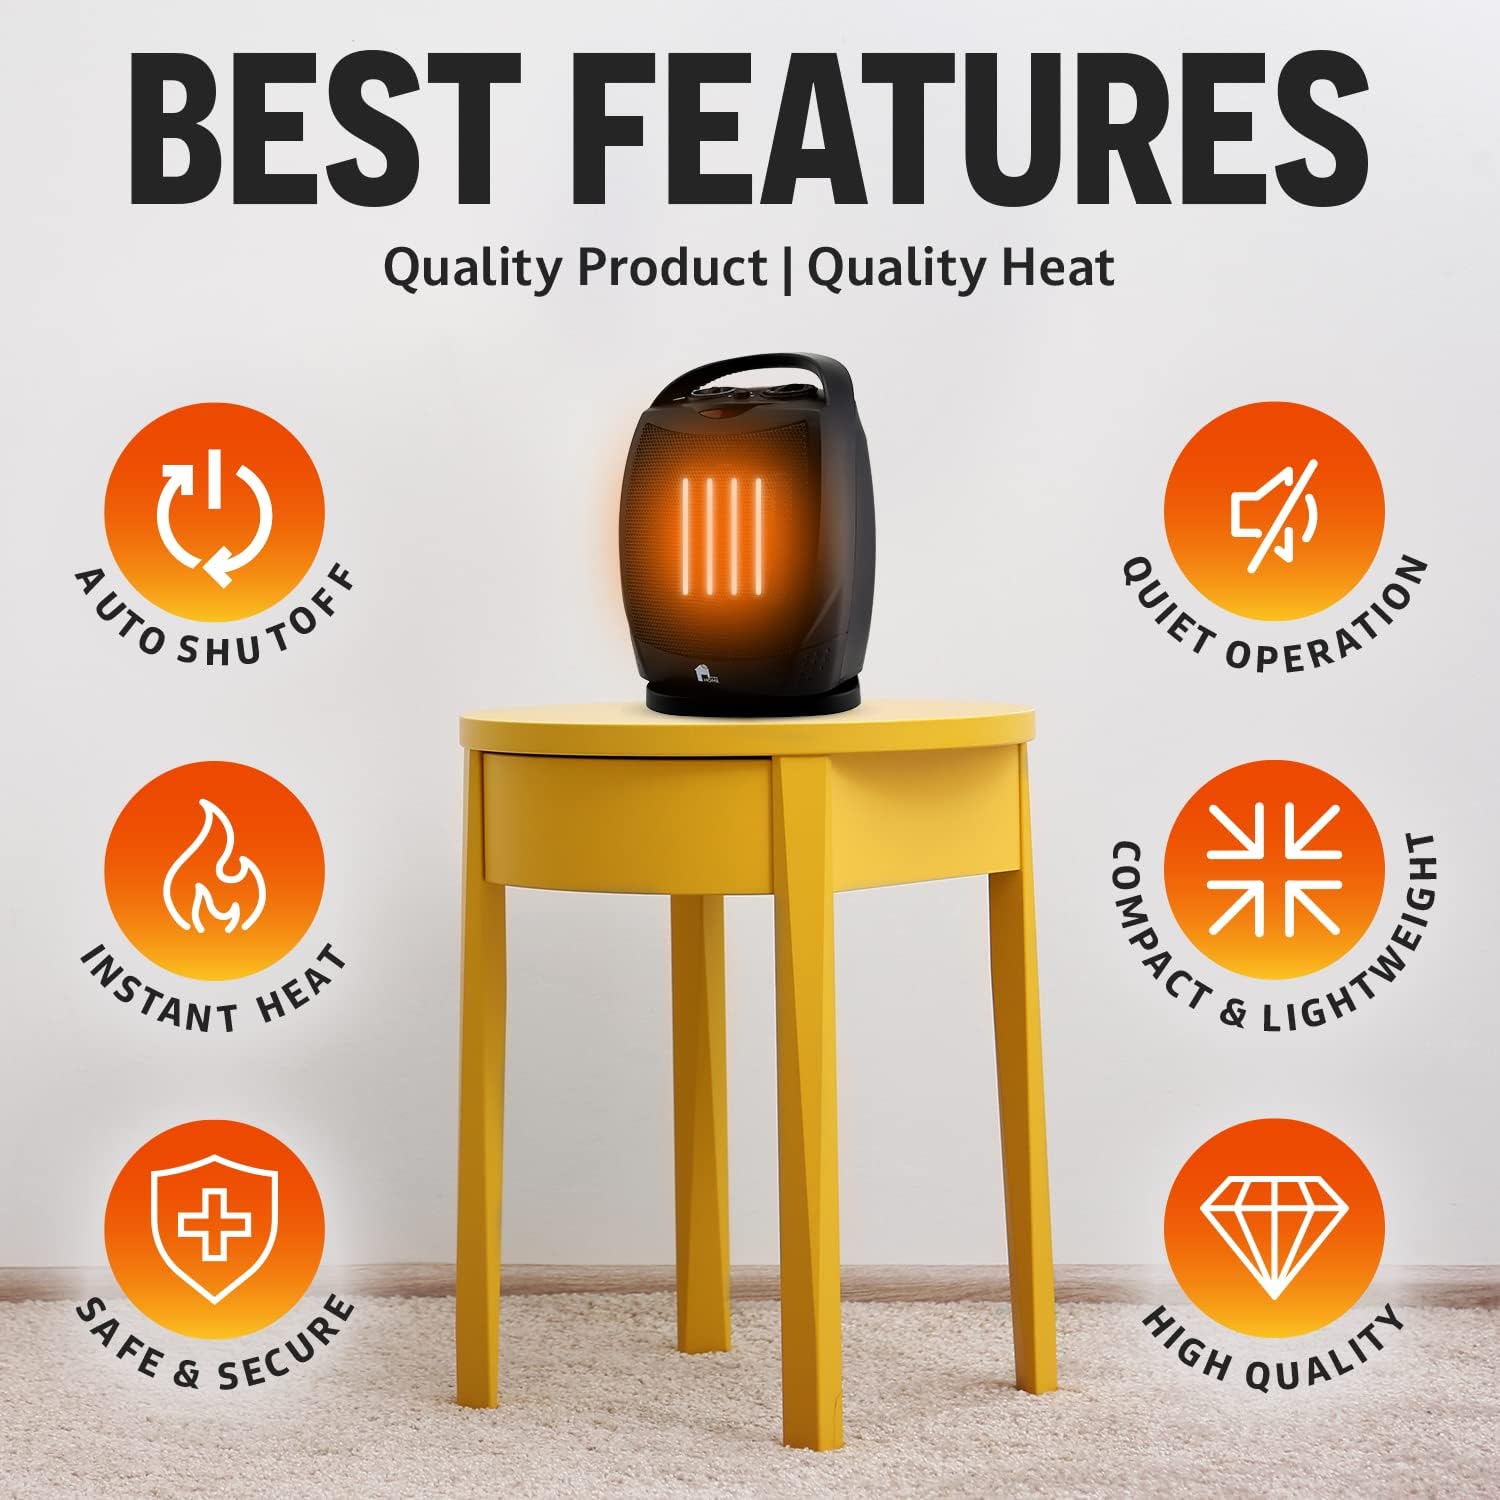 EconoHome Portable Electric Space Heater 1500W/750W - Super Quiet Oscillating Heater Fan with Thermostat, Highest Safety Standard, Heats 200 sq ft, for Indoor Office Desk, Bedroom or Living Room